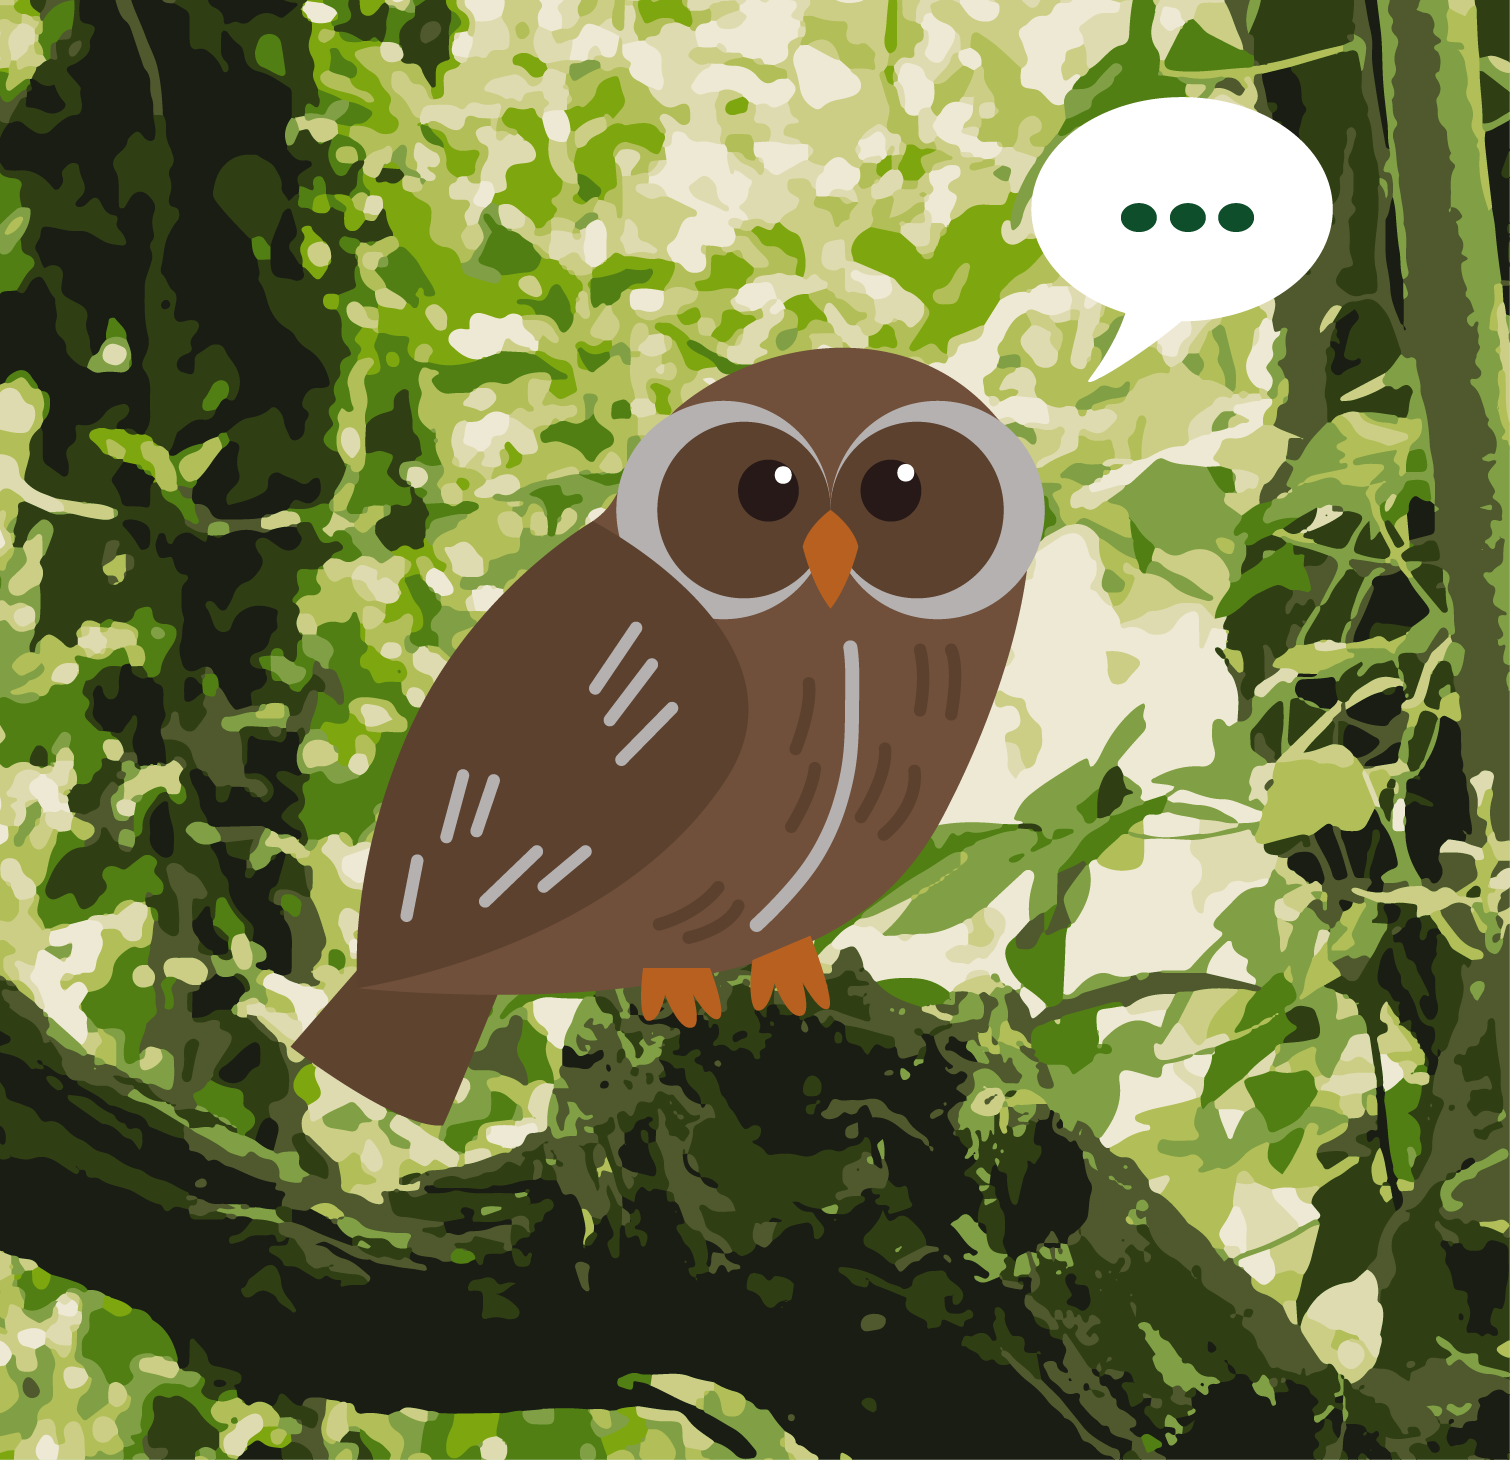 Cartoon owl sitting on a branch with a cartoon speech bubble containing '...'